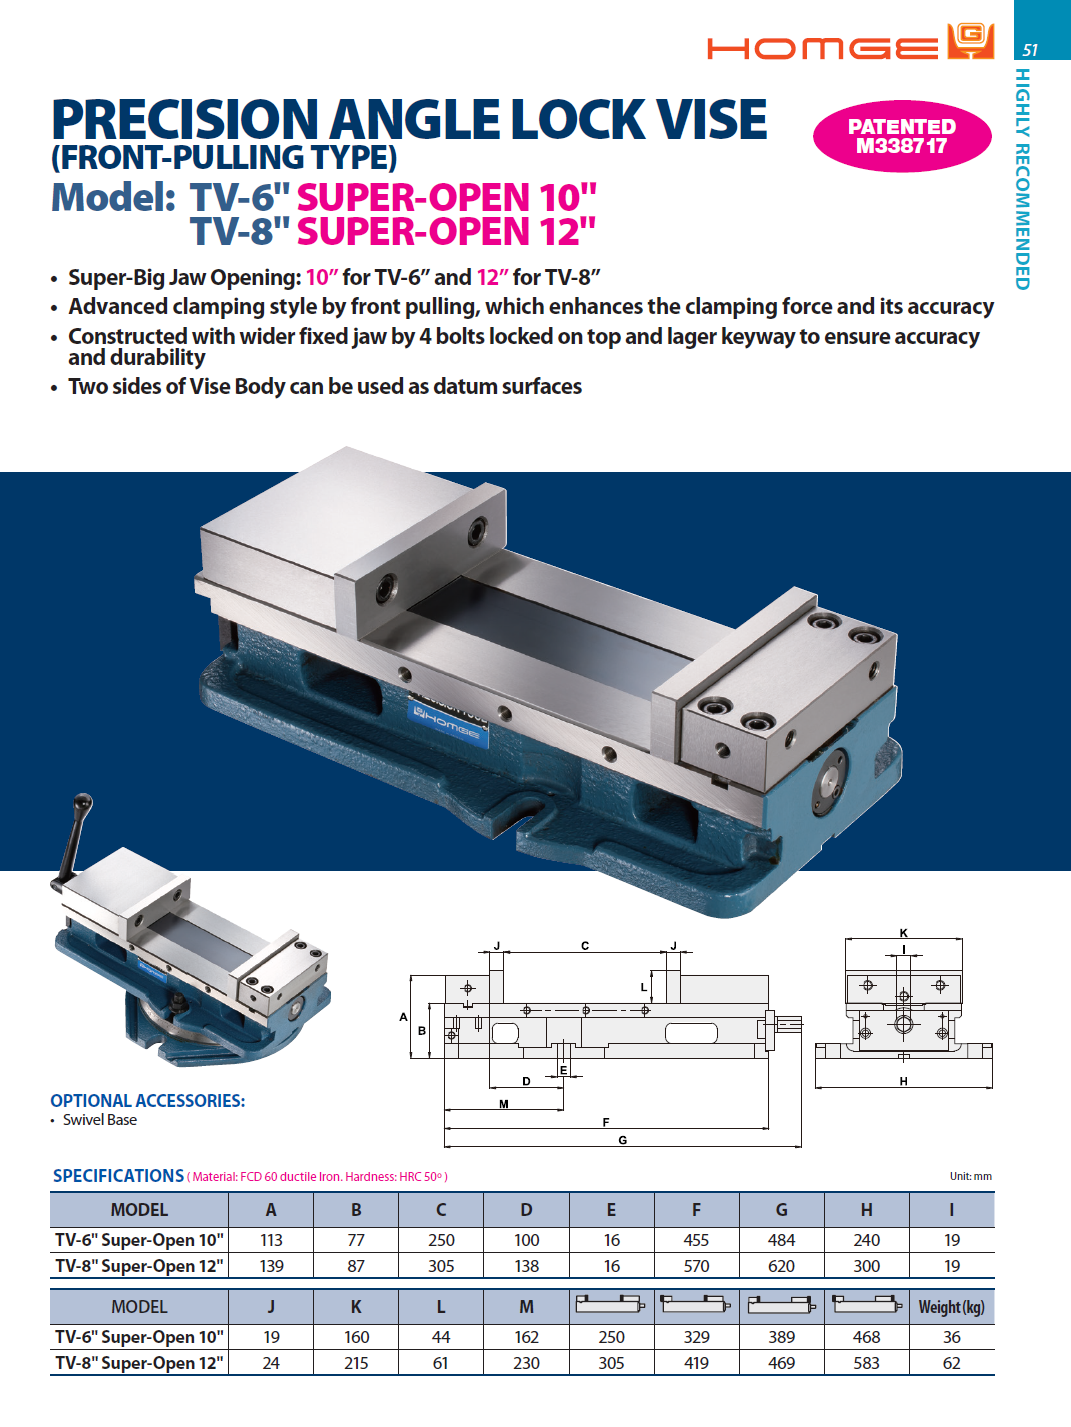 Catalog|PRECISION ANGLE LOCK VISE (FRONT-PULLING TYPE)